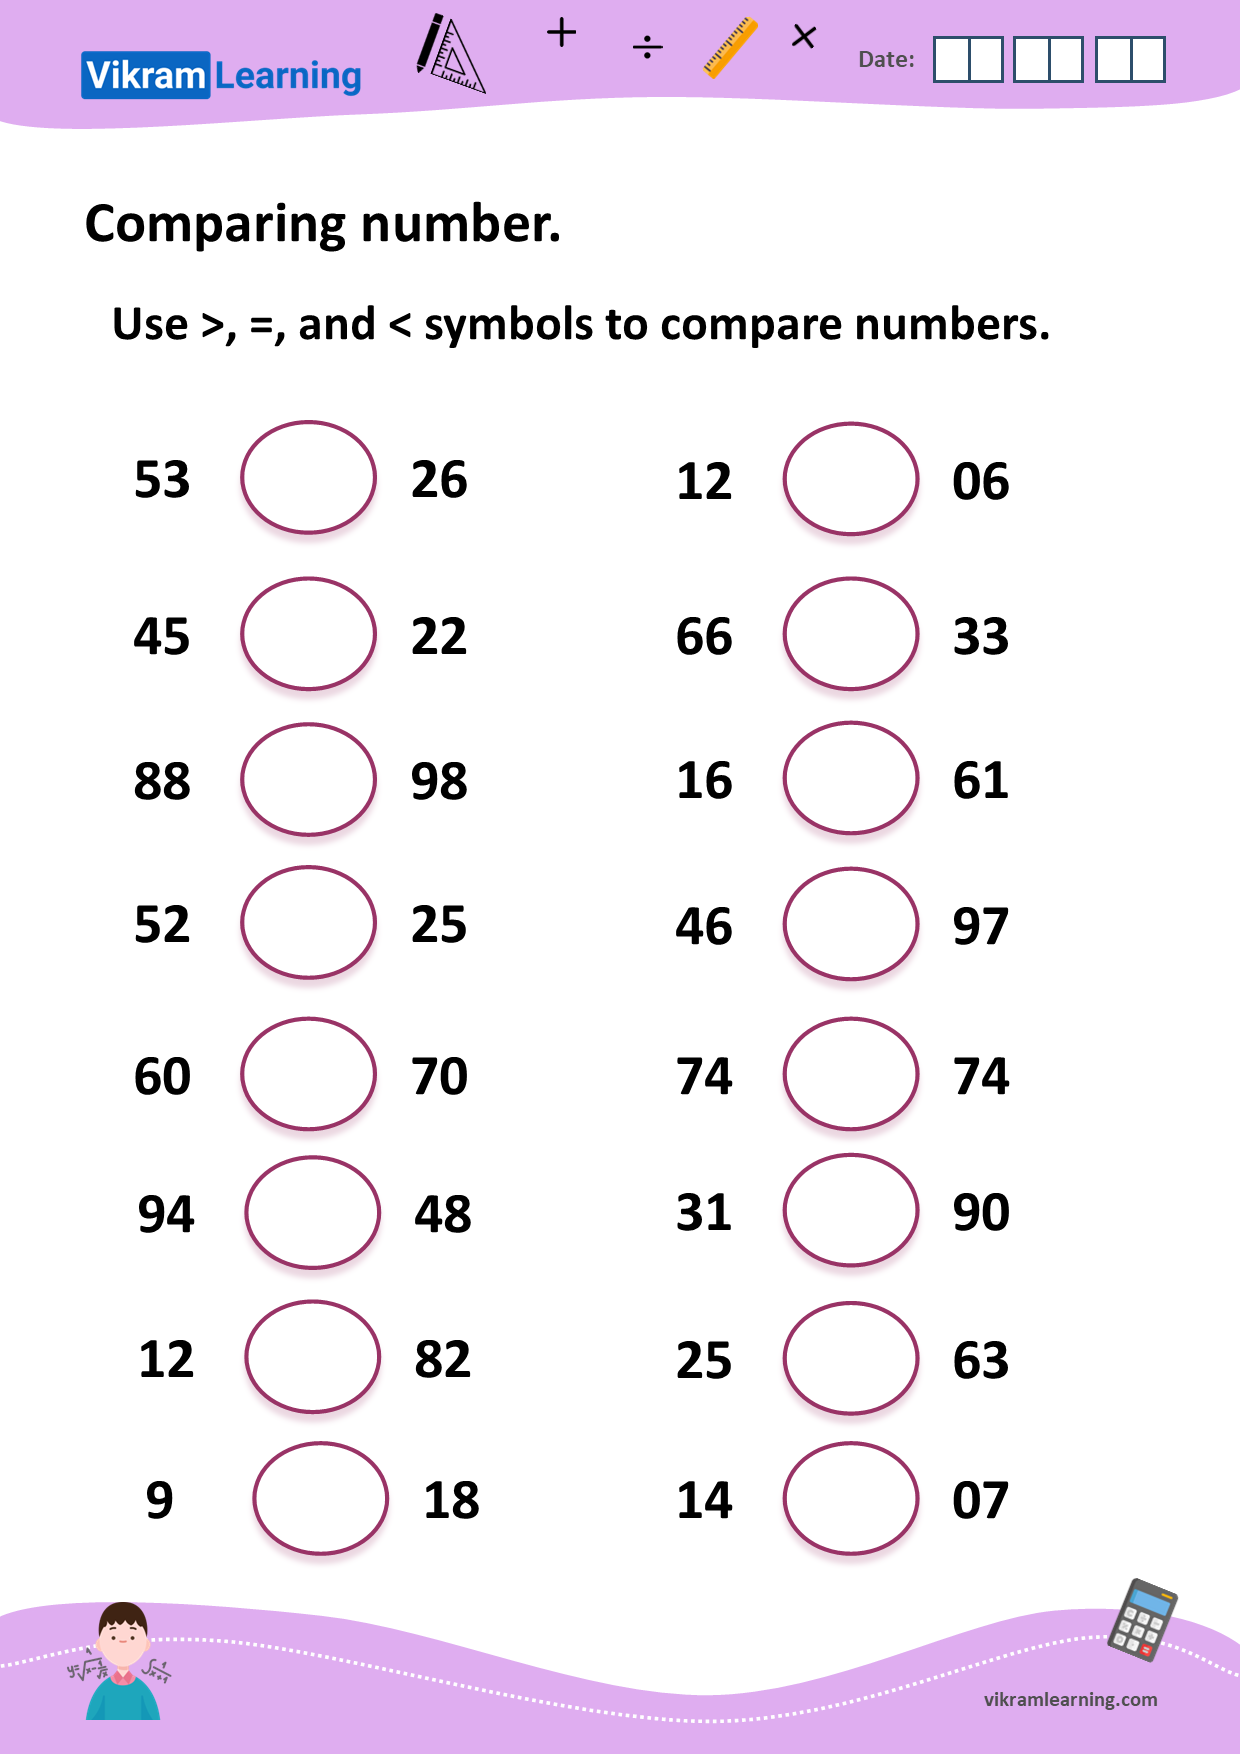 download-comparing-numbers-up-to-100-worksheets-for-free